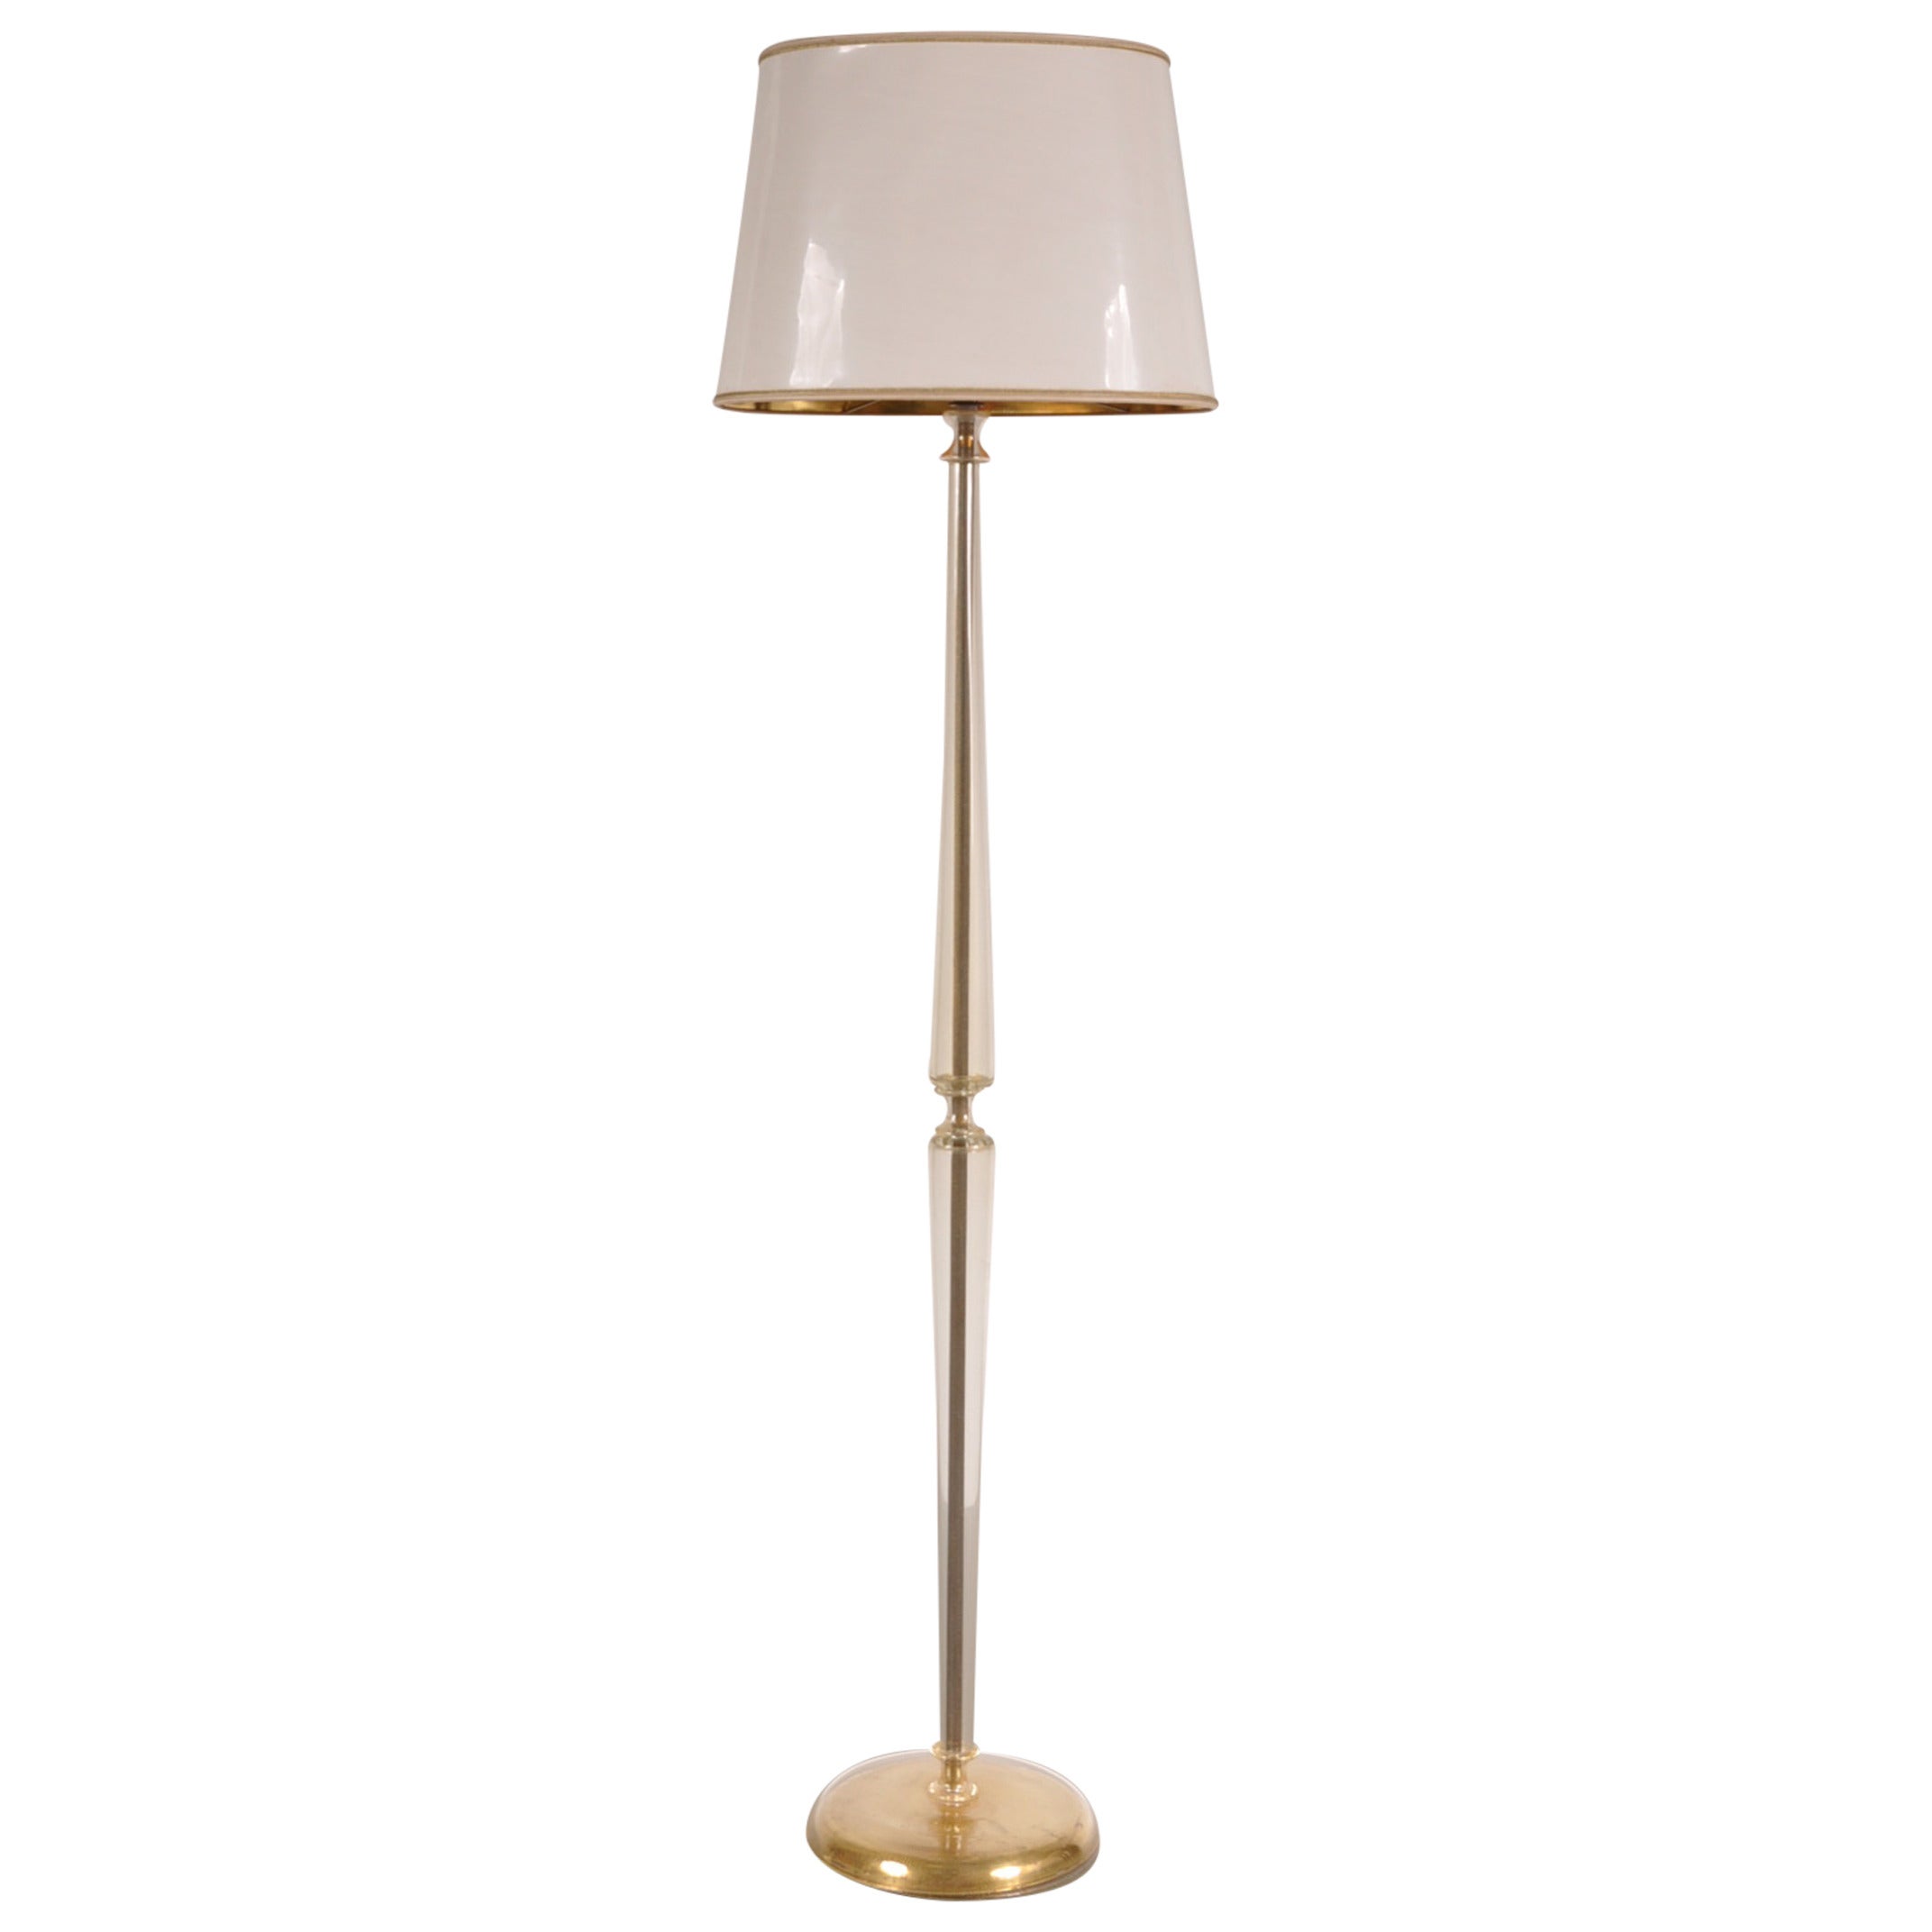 Murano Glass Floor Lamp in the Manner of Barovier e Toso, circa 1940 For Sale